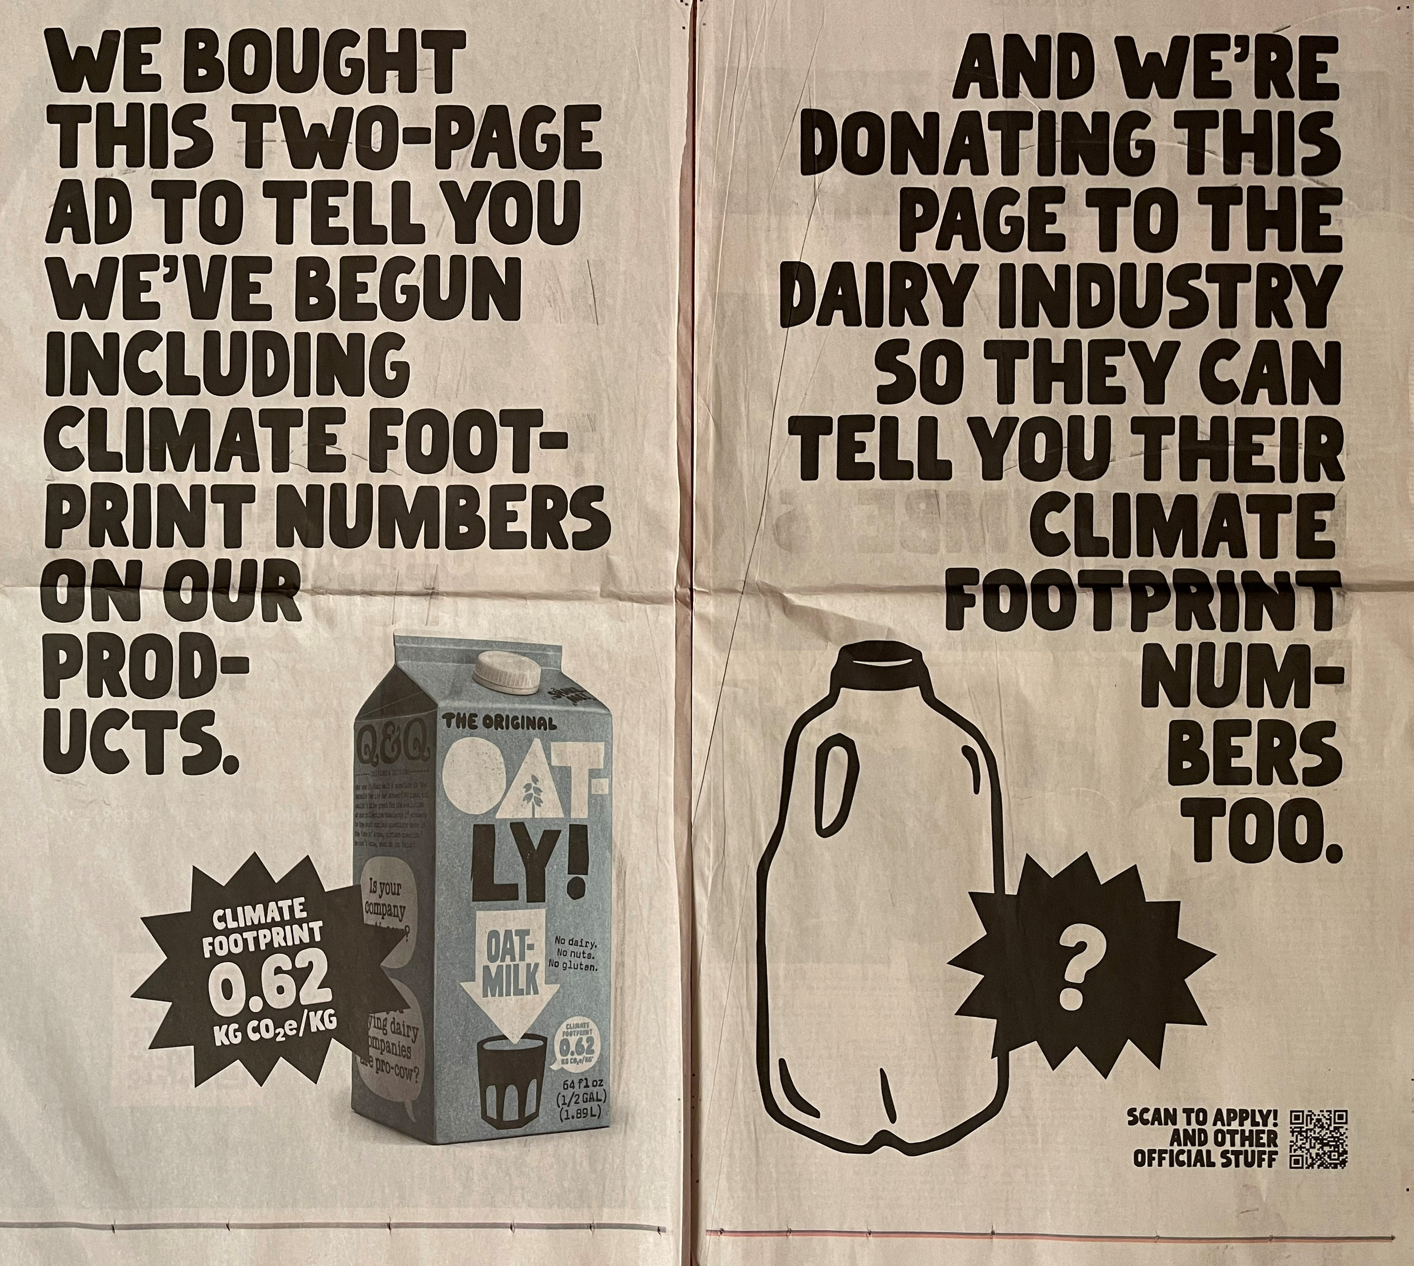 Oatly Asks Big Dairy to Put Its Money Where Its Mouth Is on Climate Claims